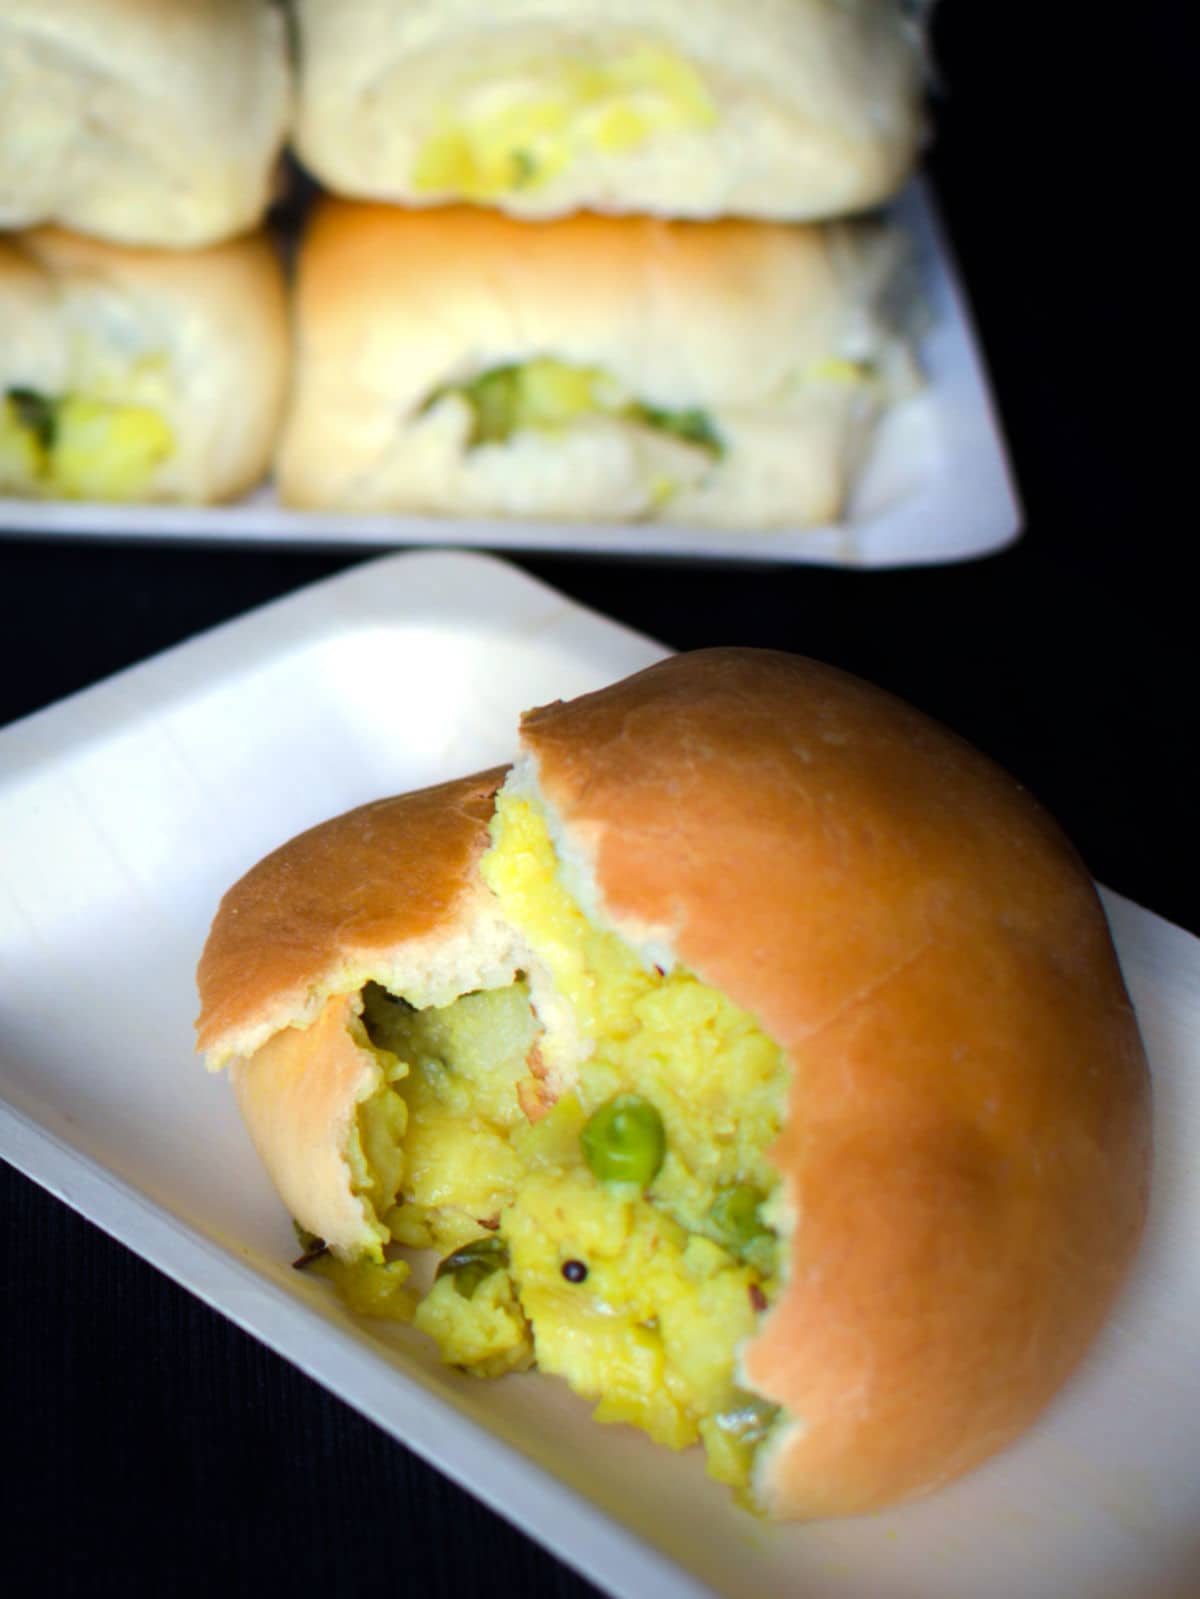 Close up of palya bun showing the inner filling.